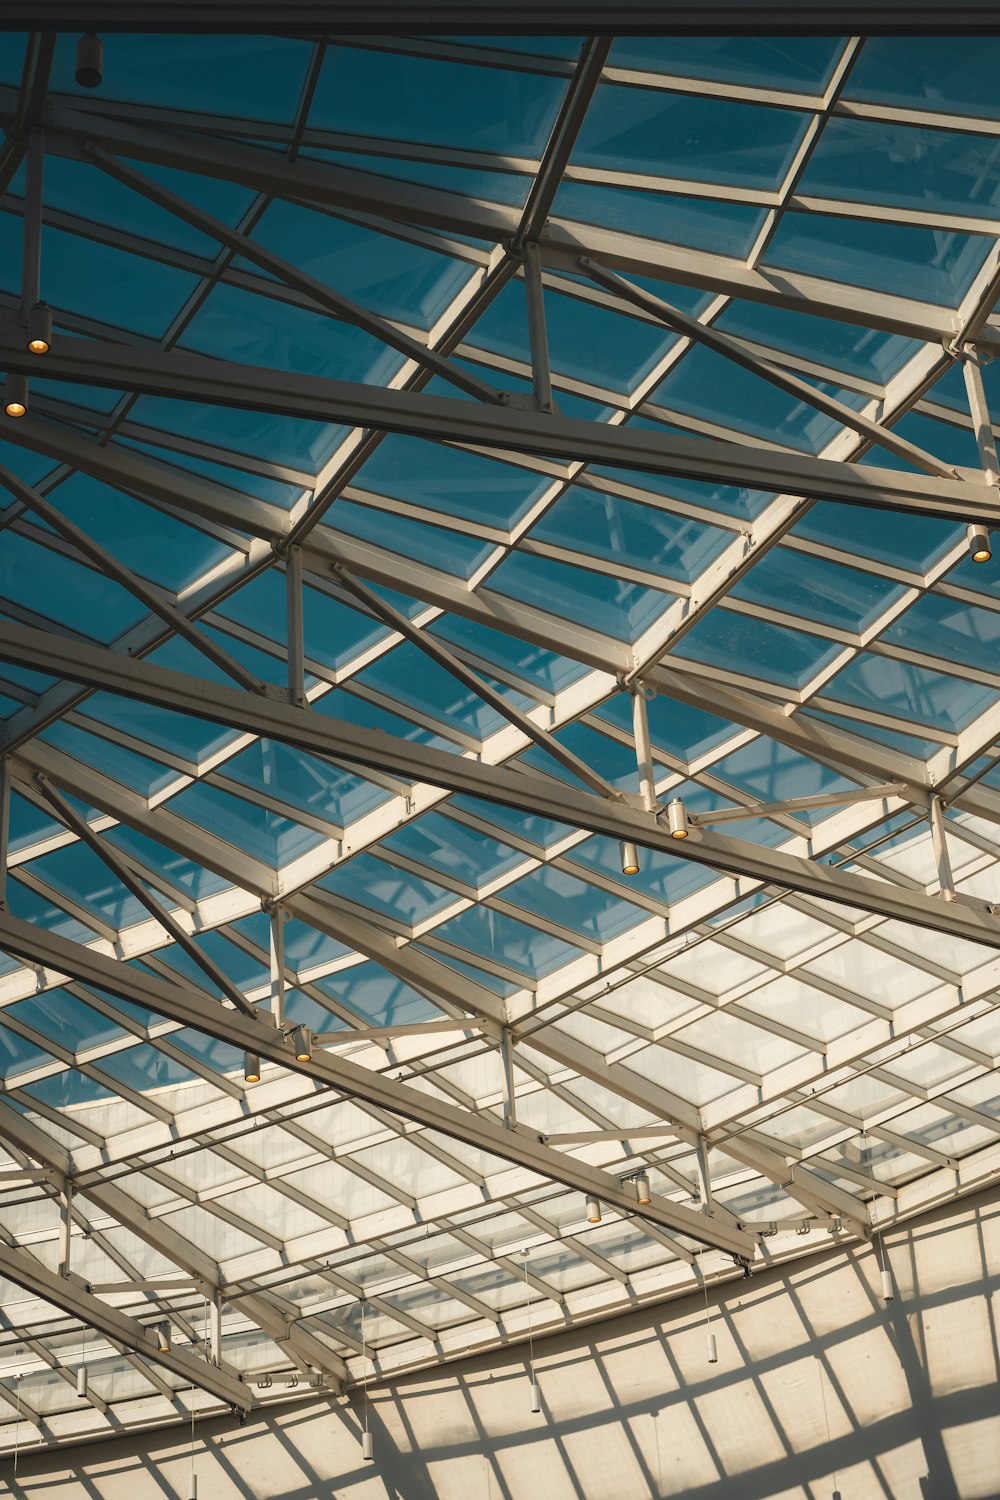 a view of a glass roof in a building